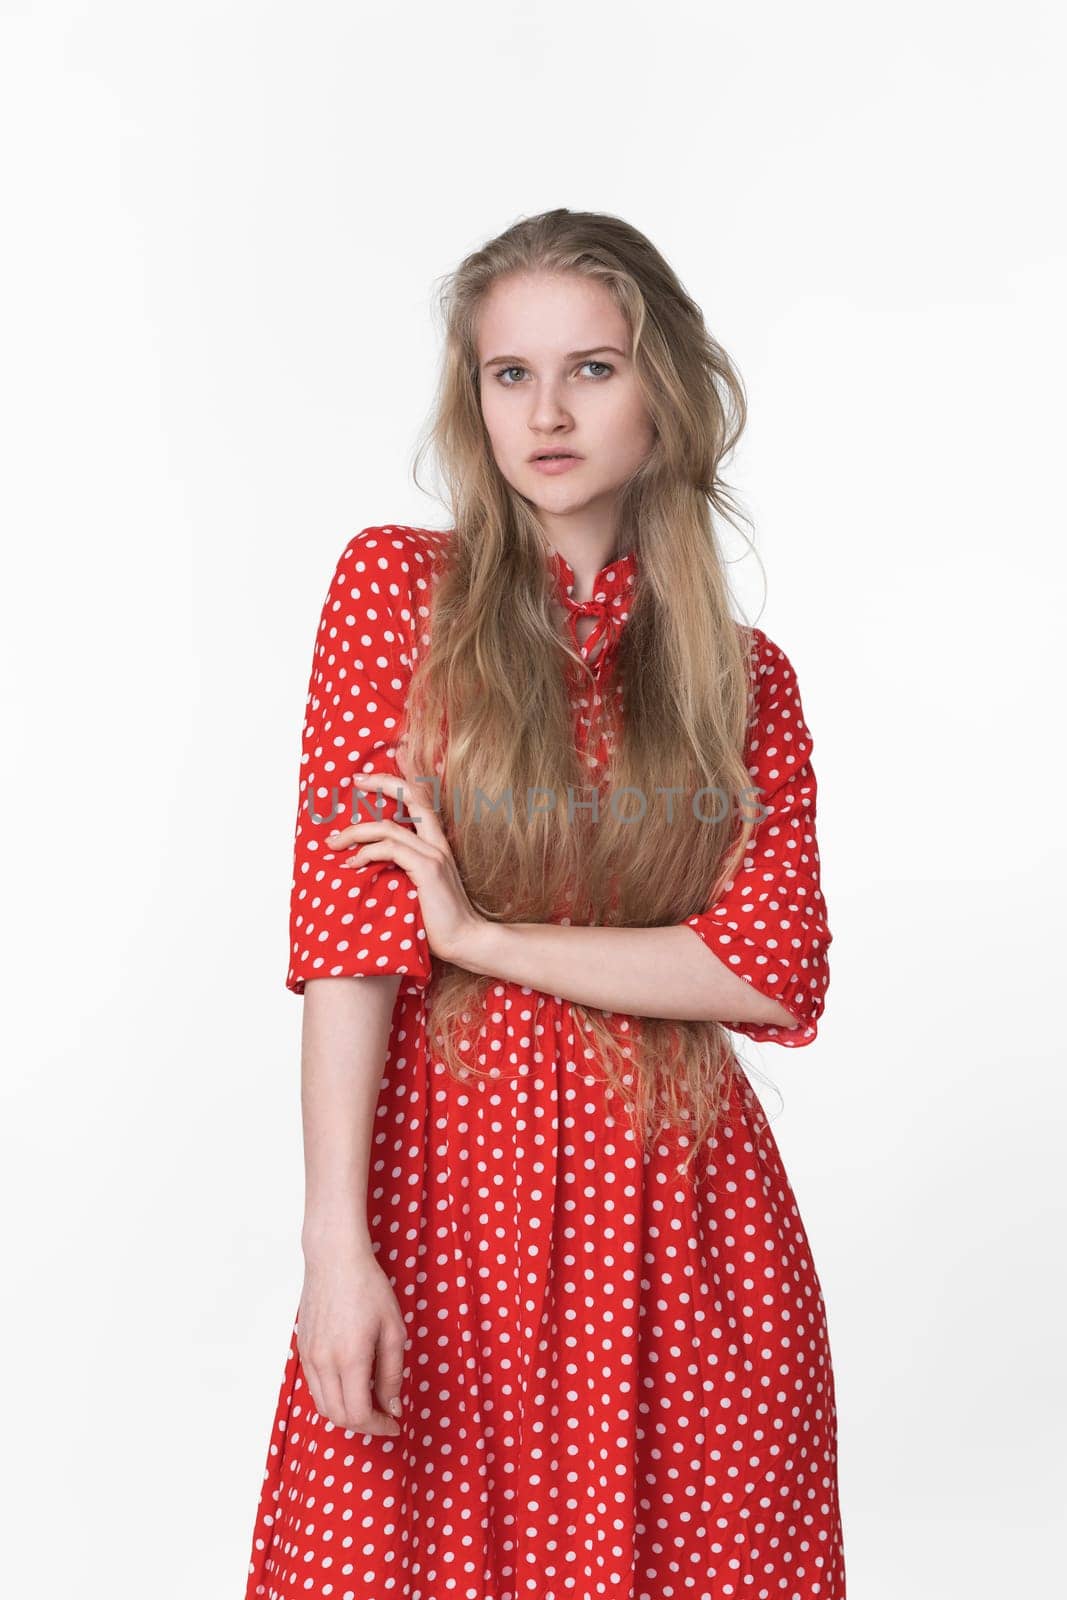 Fashionable young blonde woman with long hair dressed in summer red polka dot dress poses on white background. Caucasian female 21 years old looking at camera. Studio shot, waist up, front view